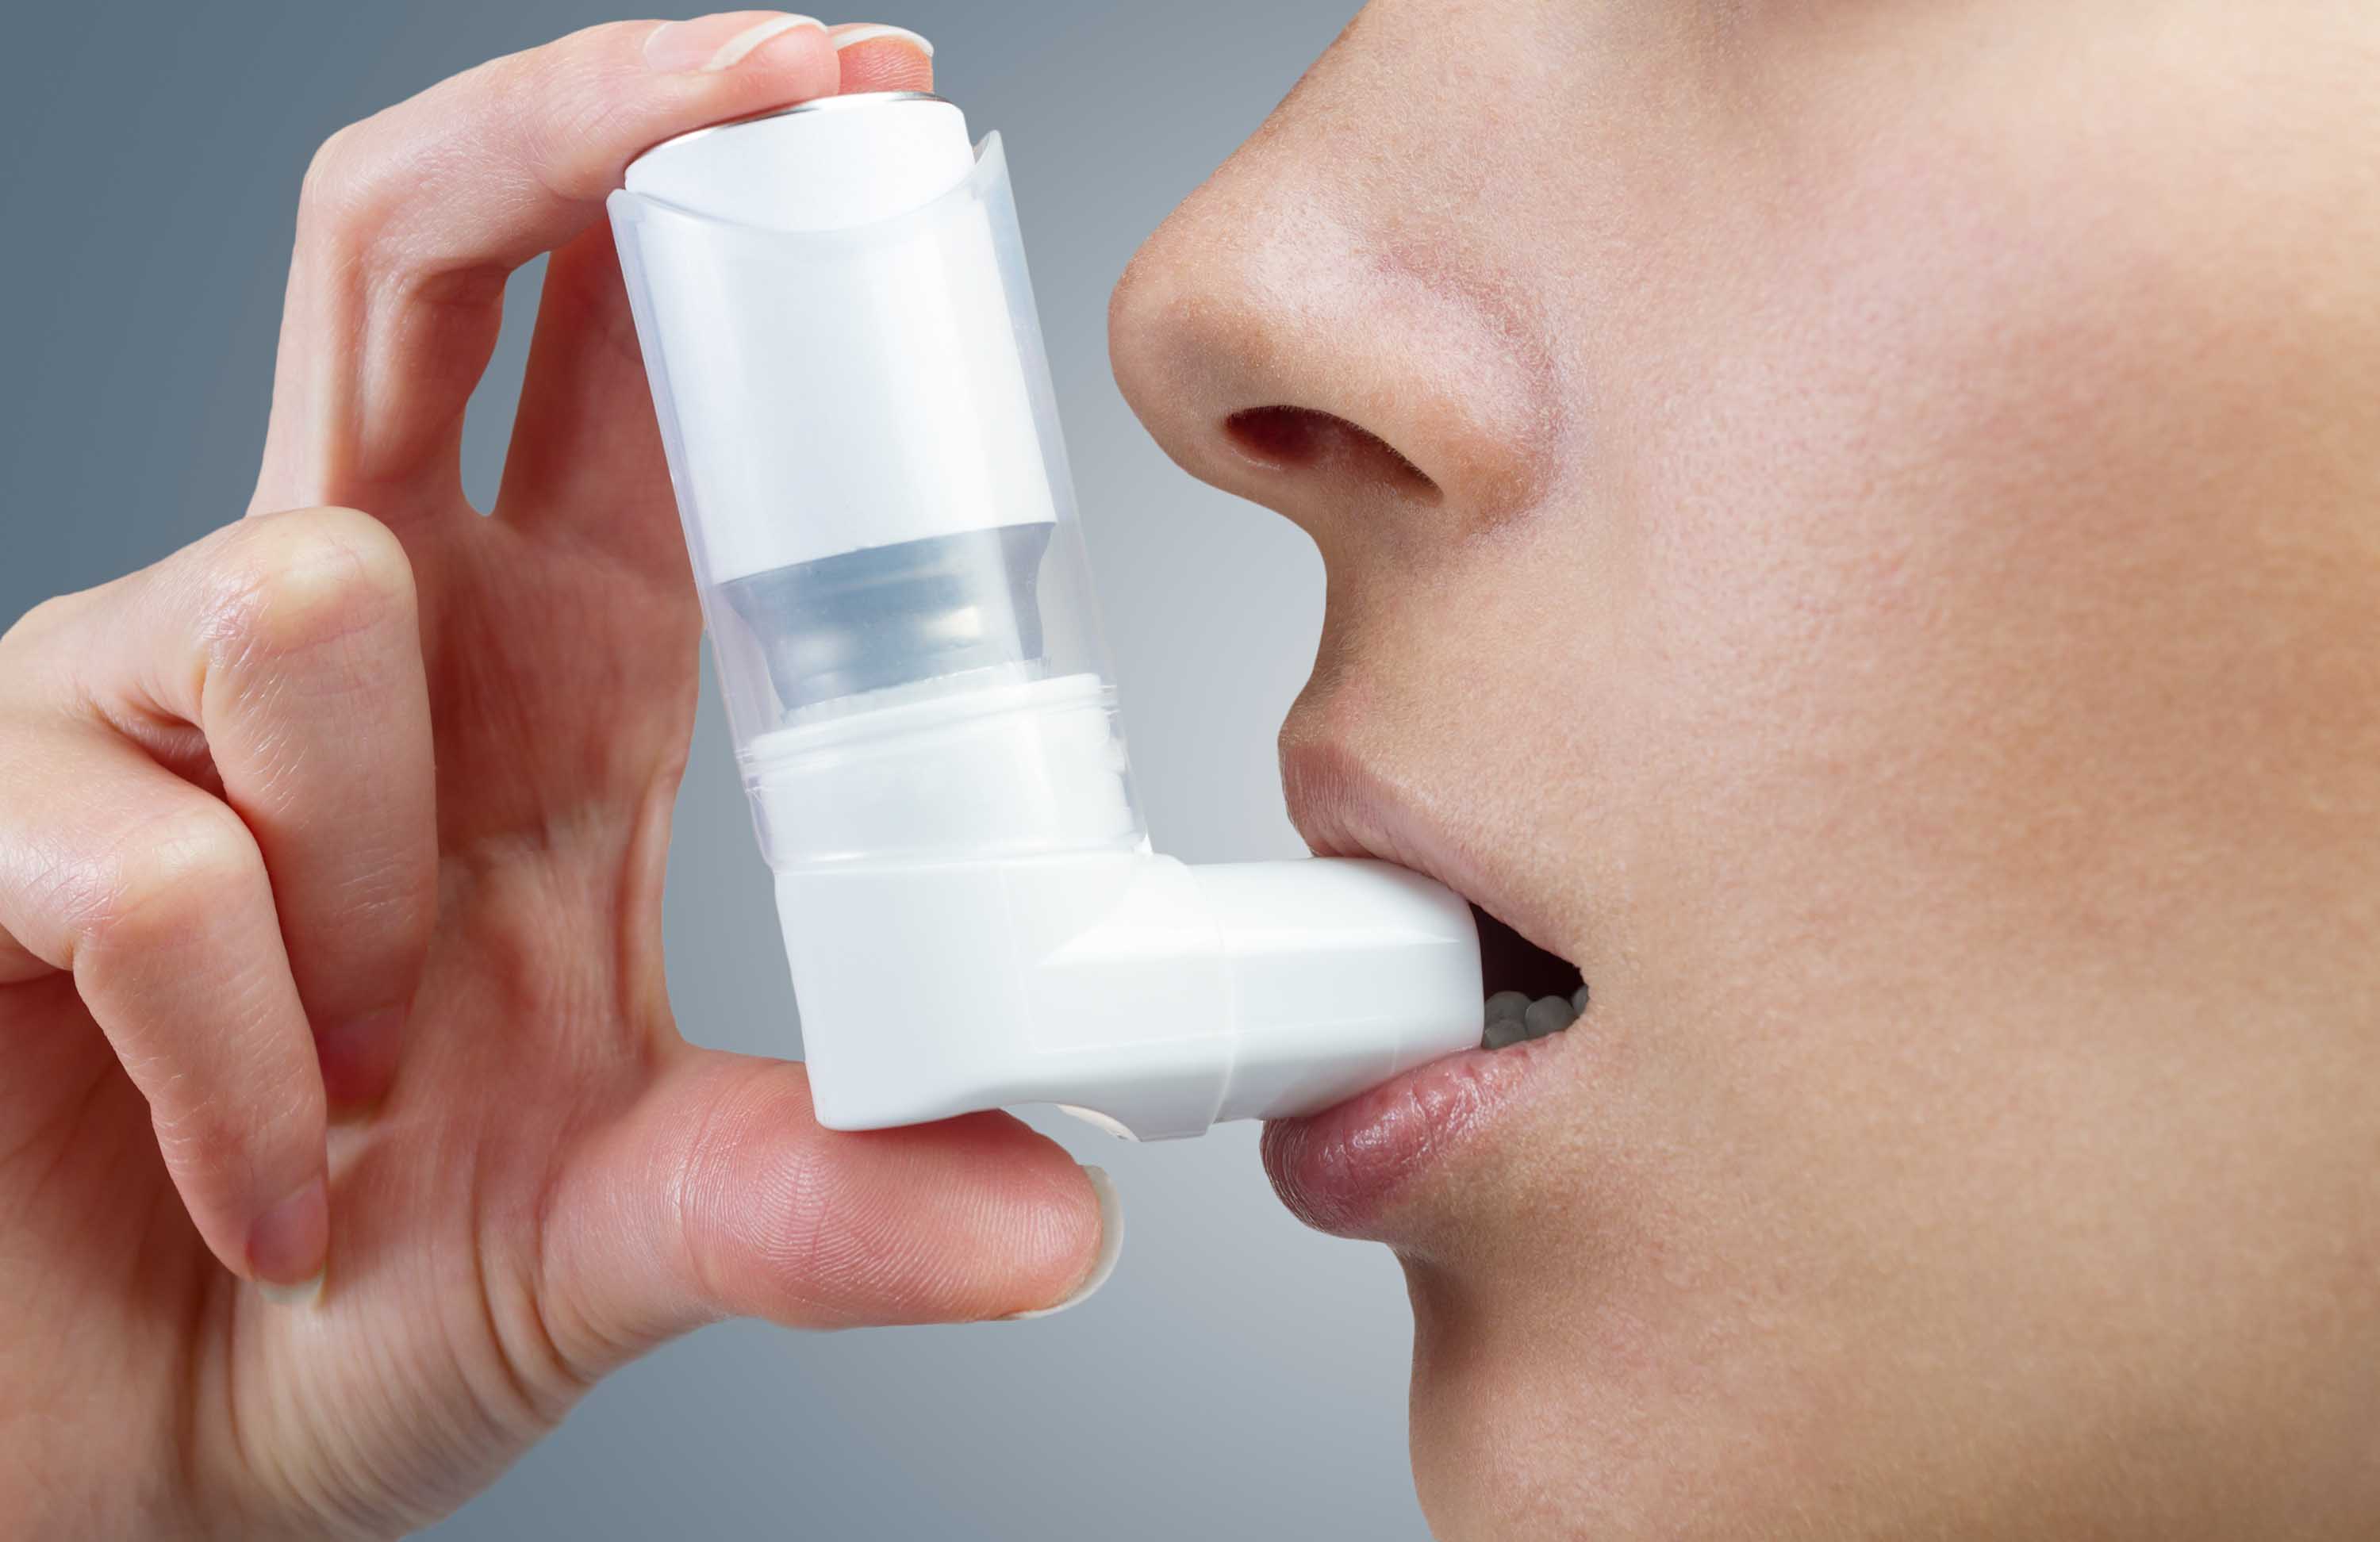 Stop Here And Check Out These Great Asthma Tips